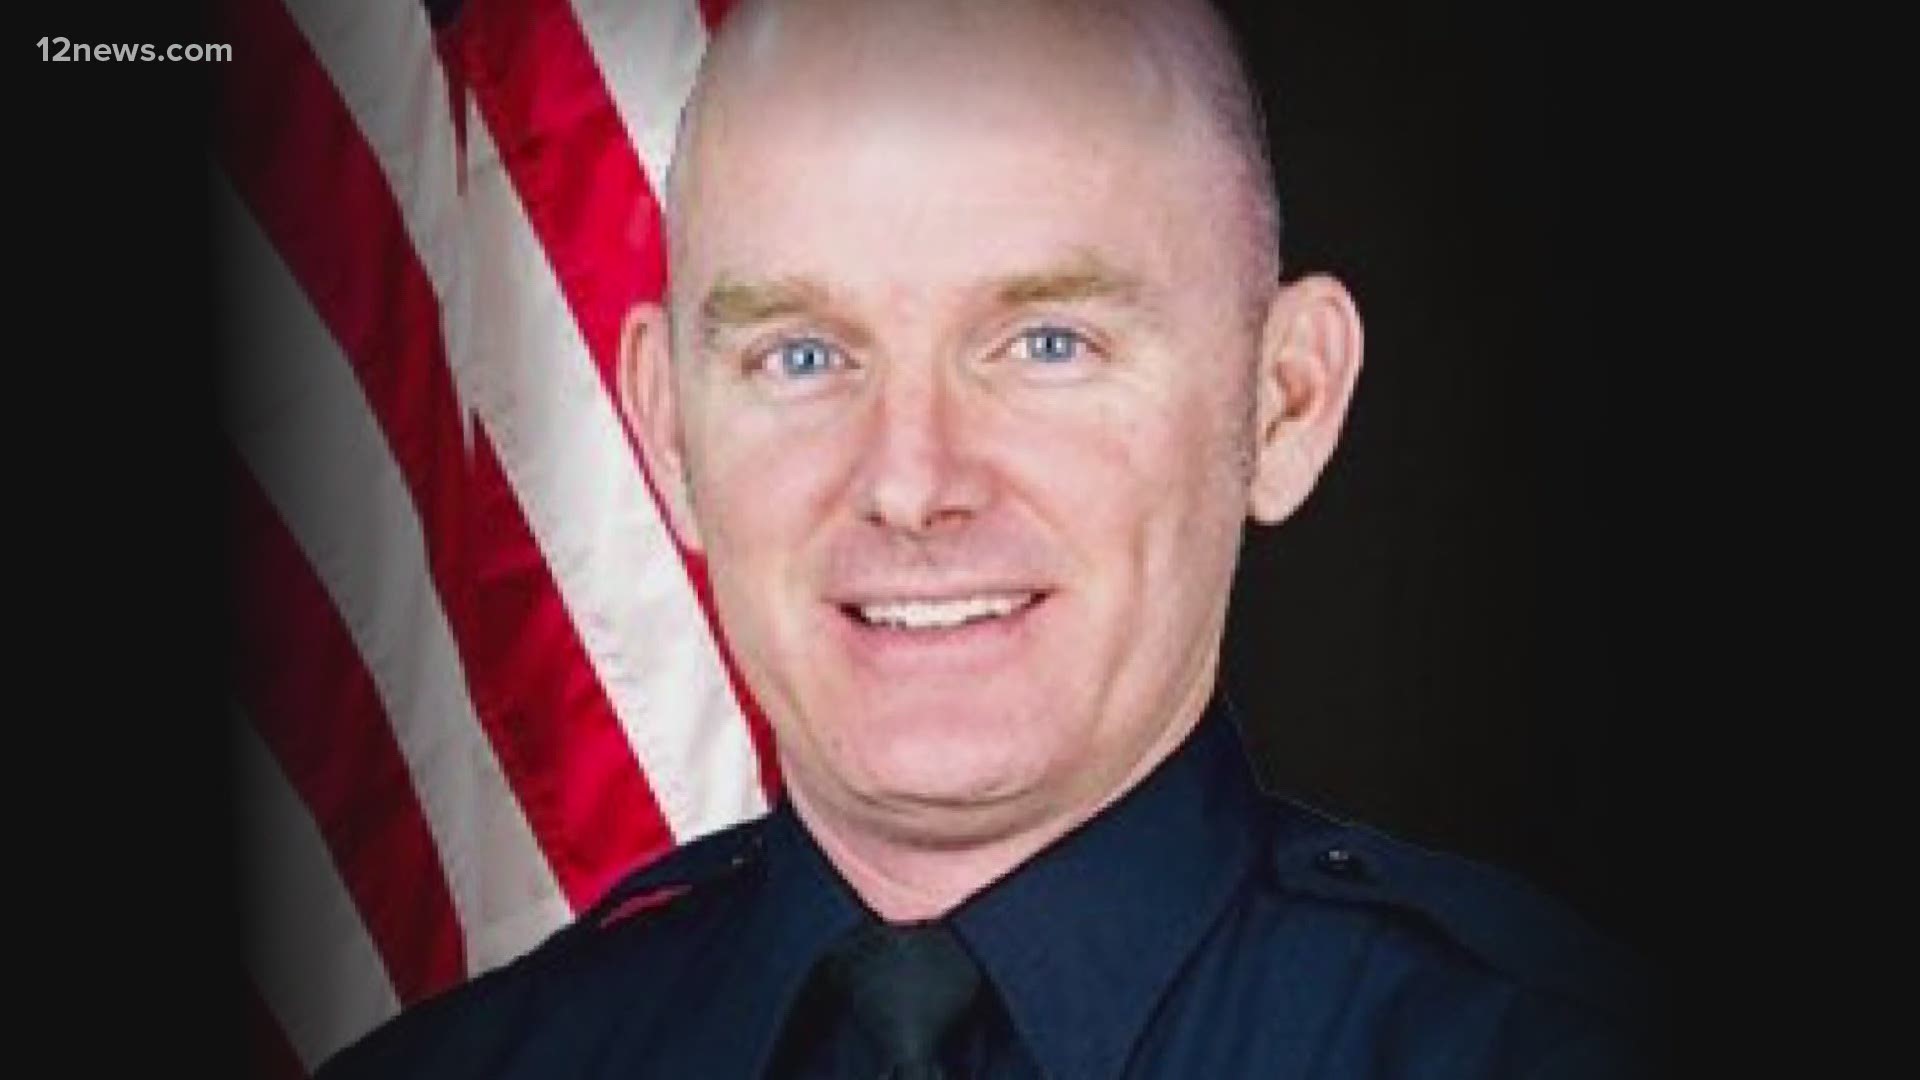 Chandler Officer Christopher Farrar worked for the department for 18 years. He held multiple roles, received multiple awards and positively impacted multiple lives.